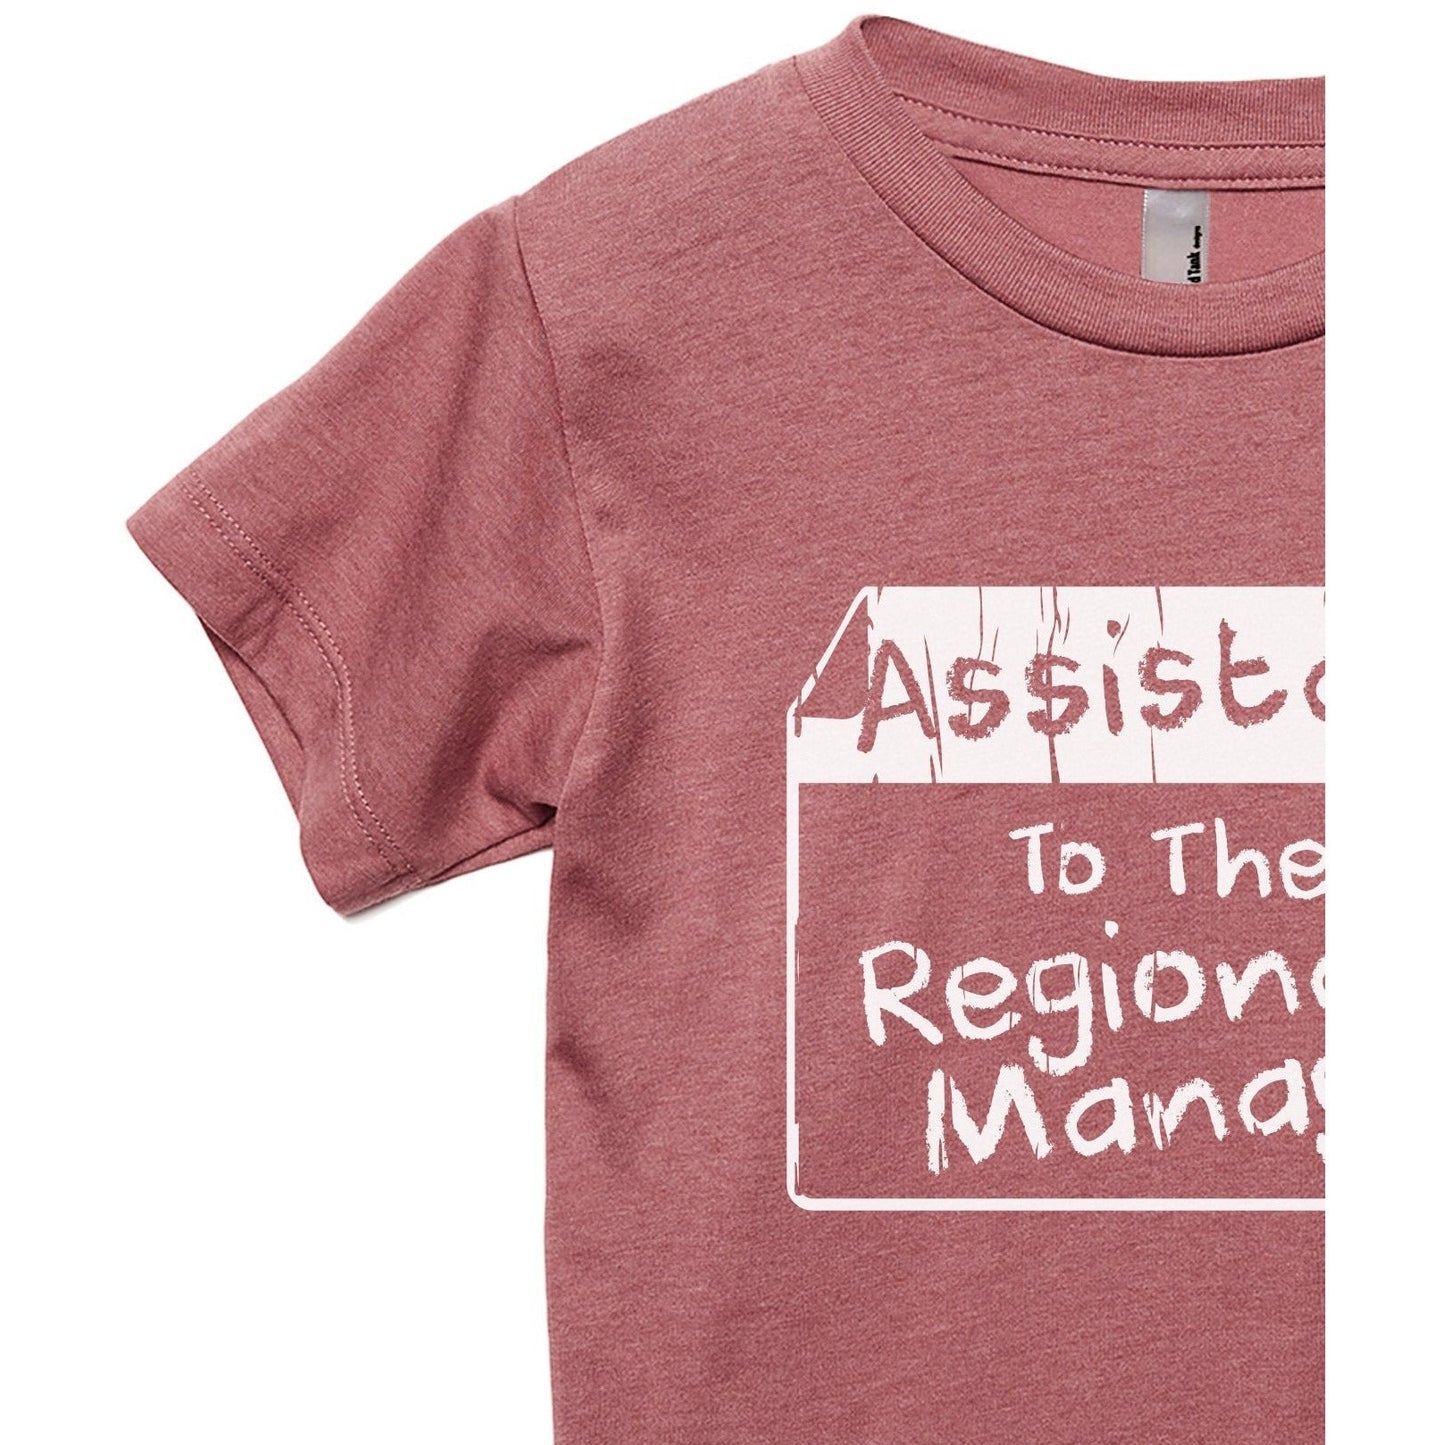 Assistant To The Regional Manager